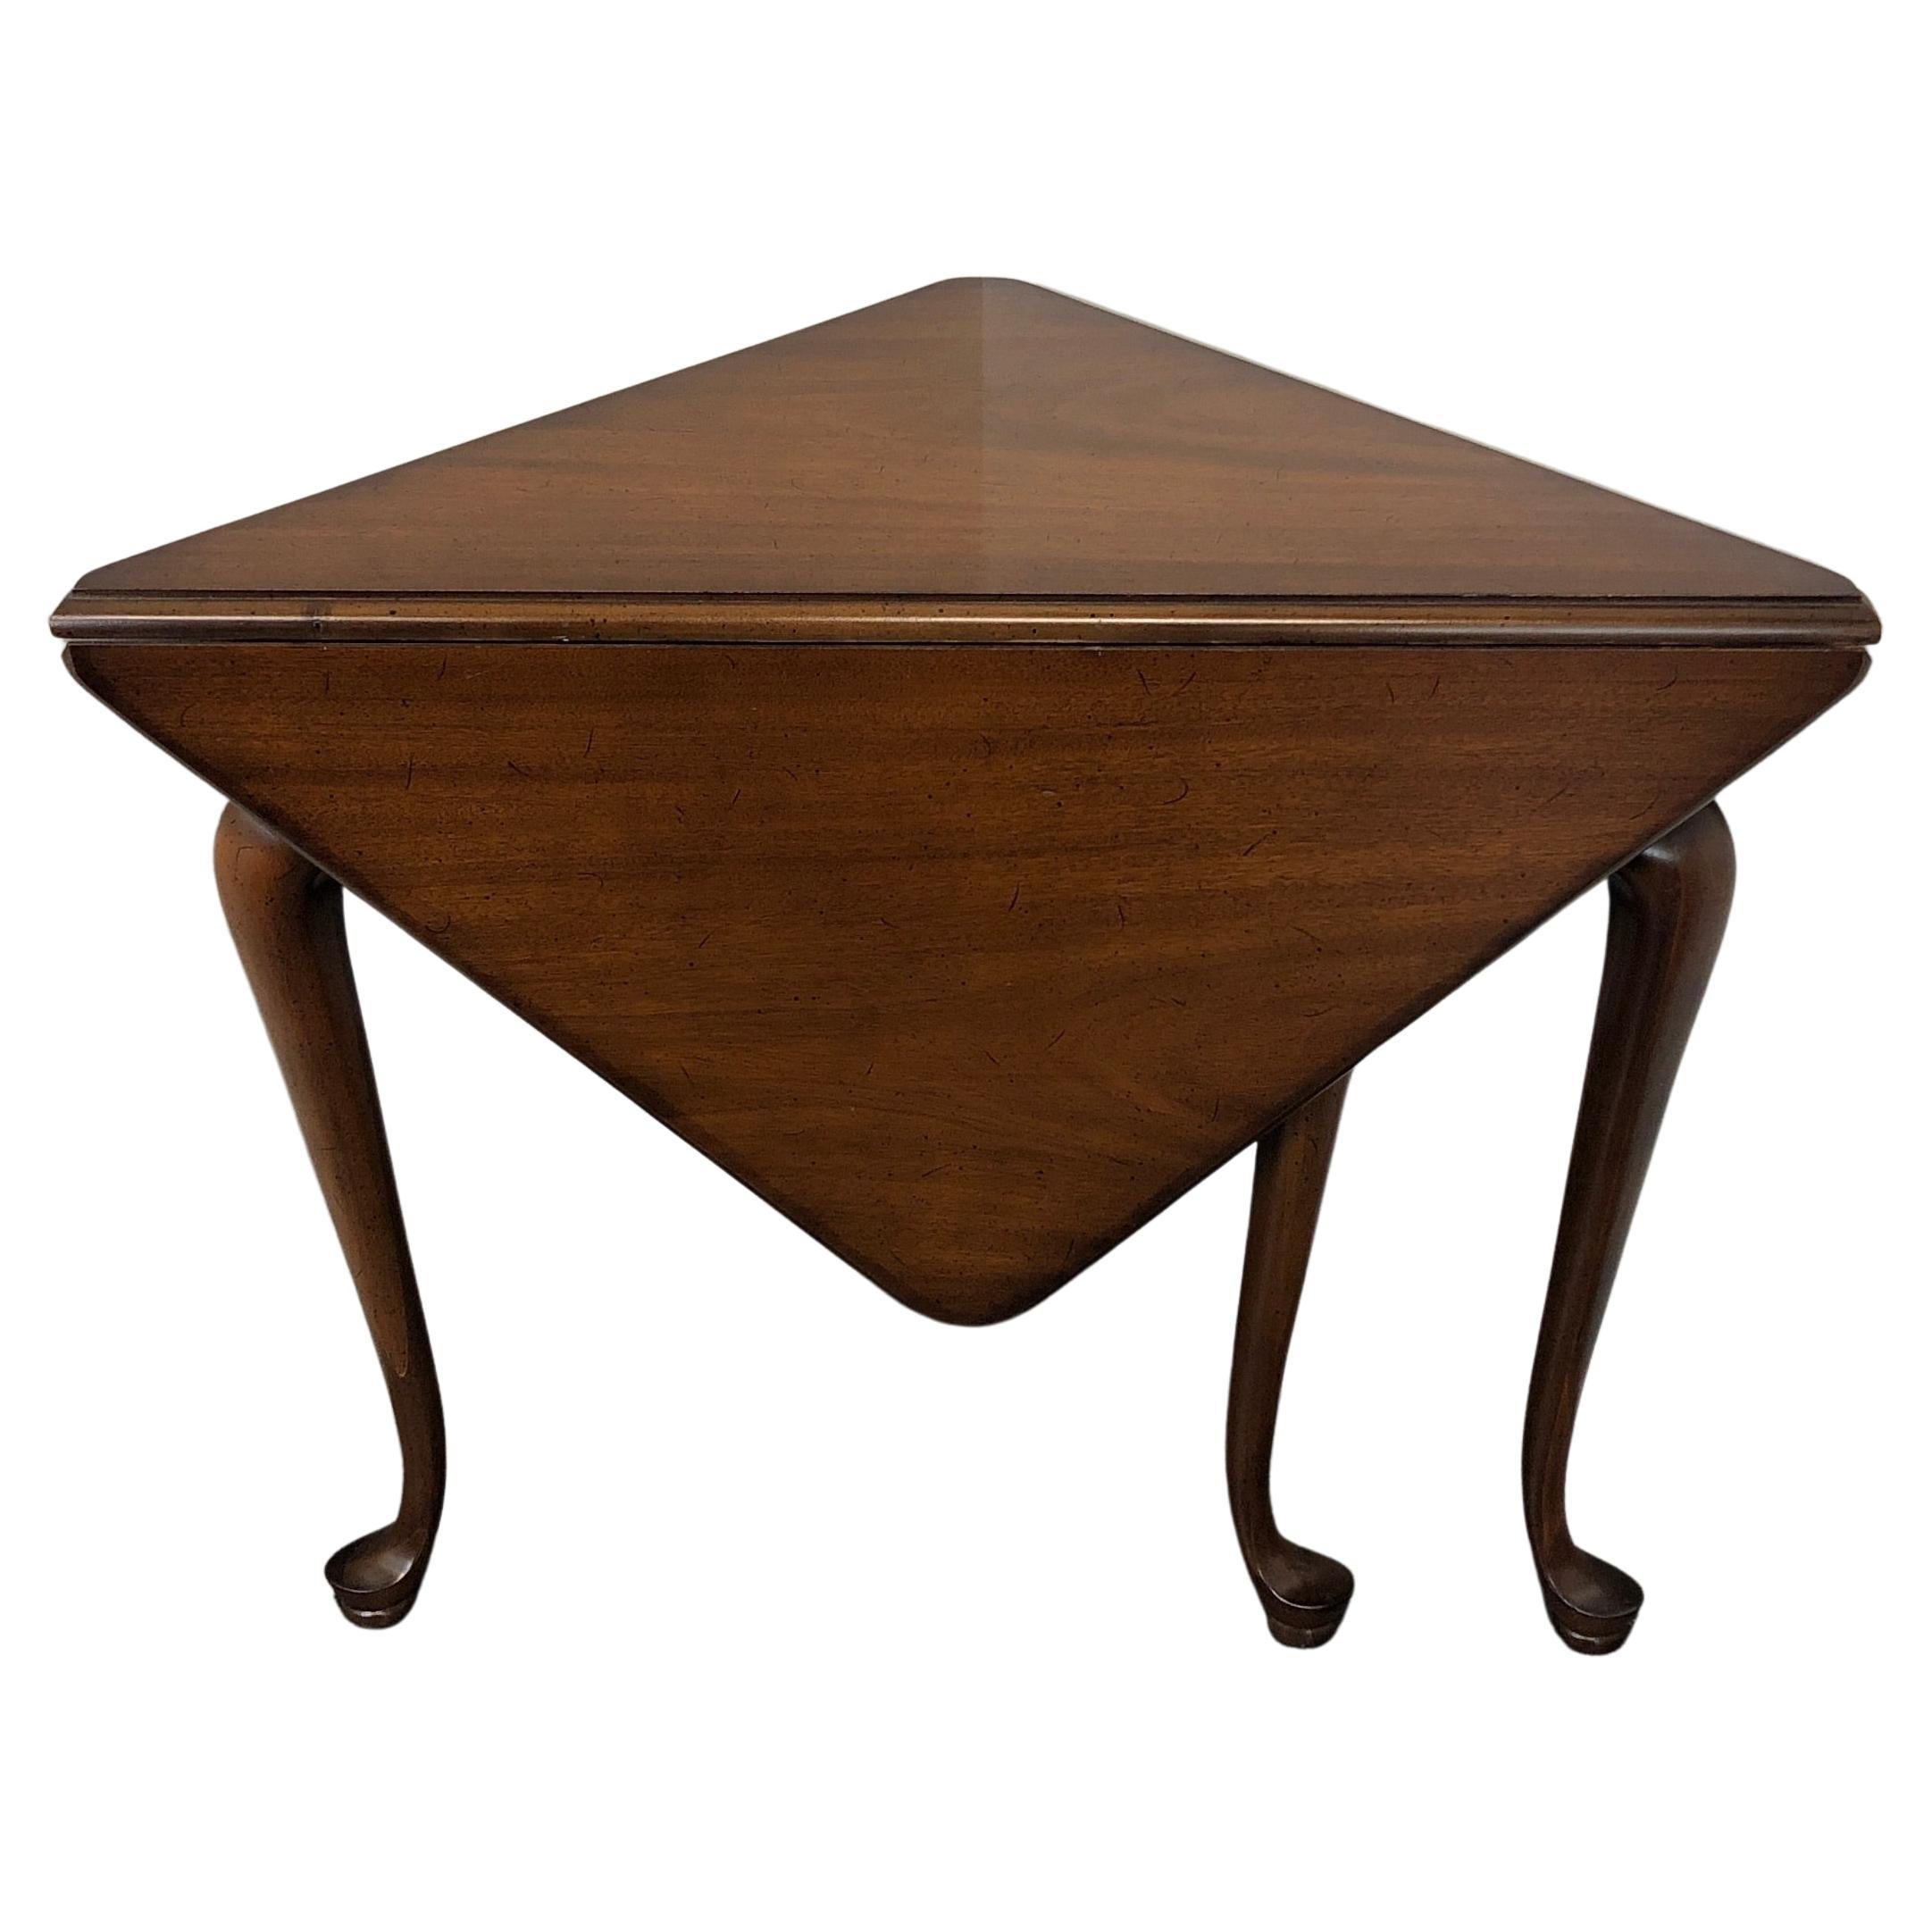 Solid Mahogany Queen Anne Style Drop-Leaf Handkerchief Table